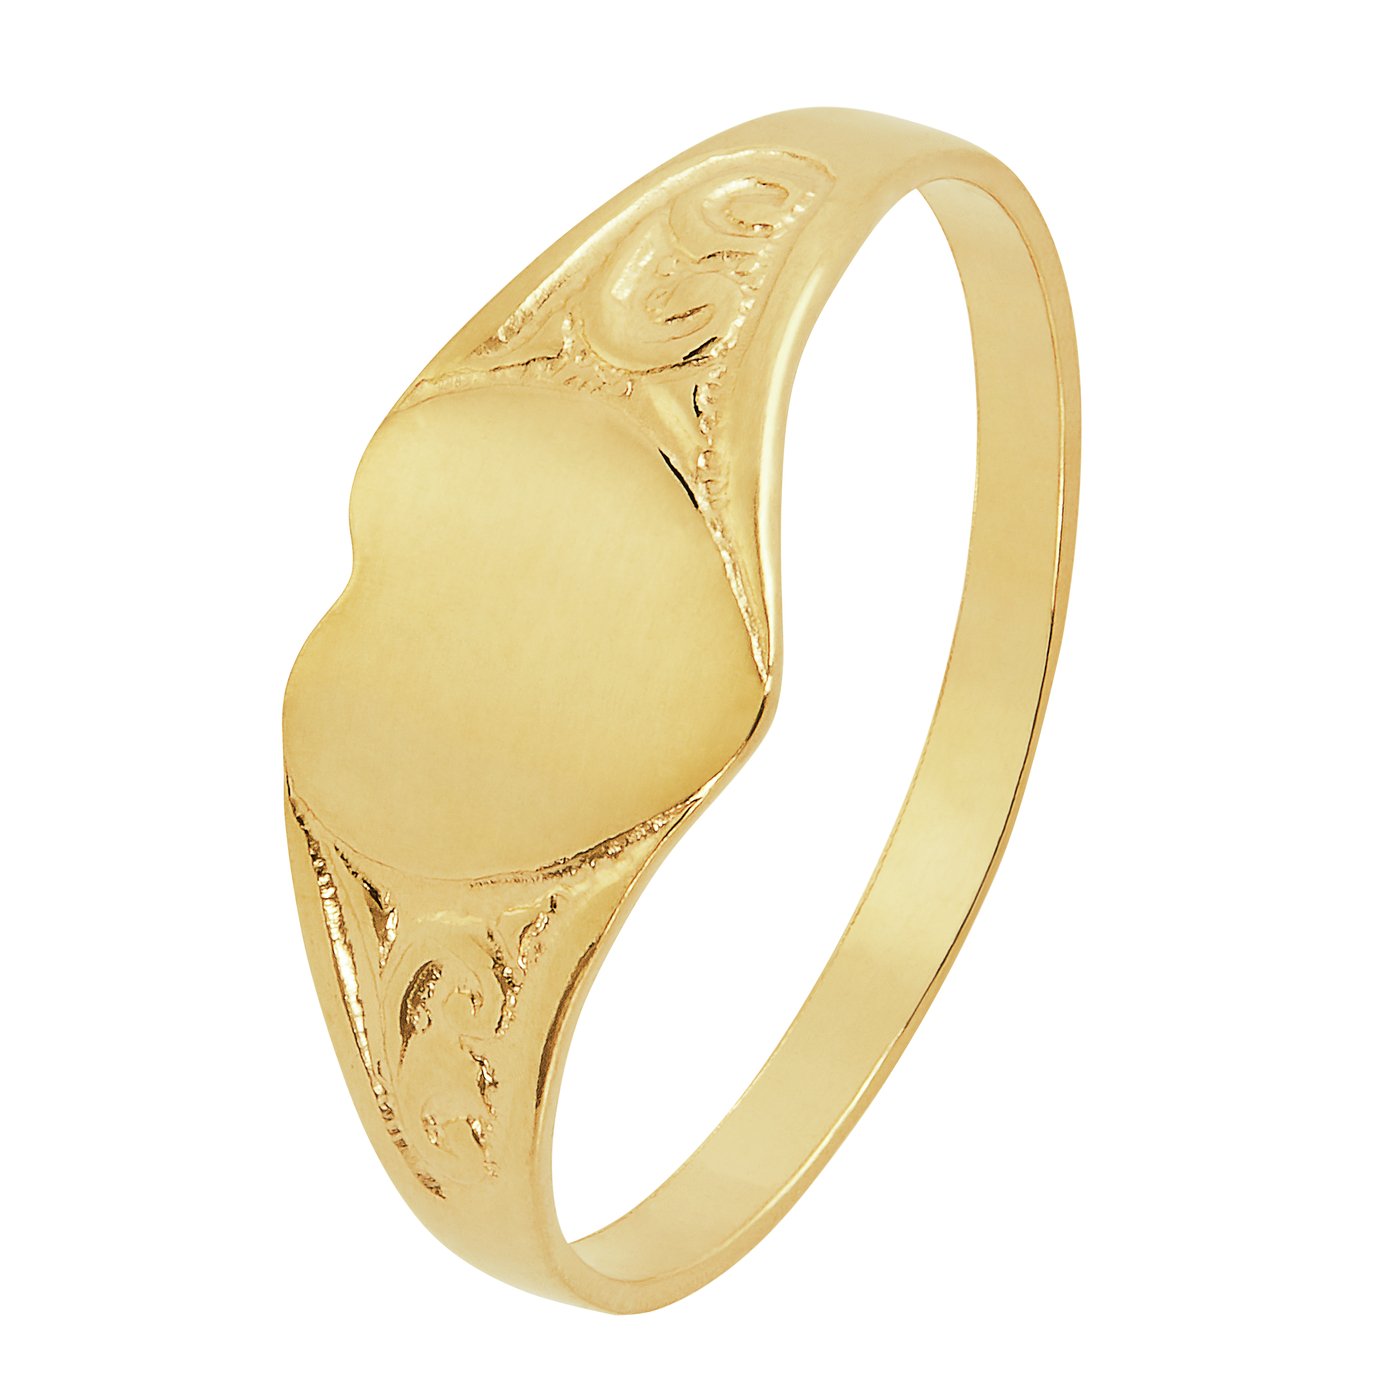 Made in England 9ct Yellow Gold Children's Fancy Heart Design Signet Ring